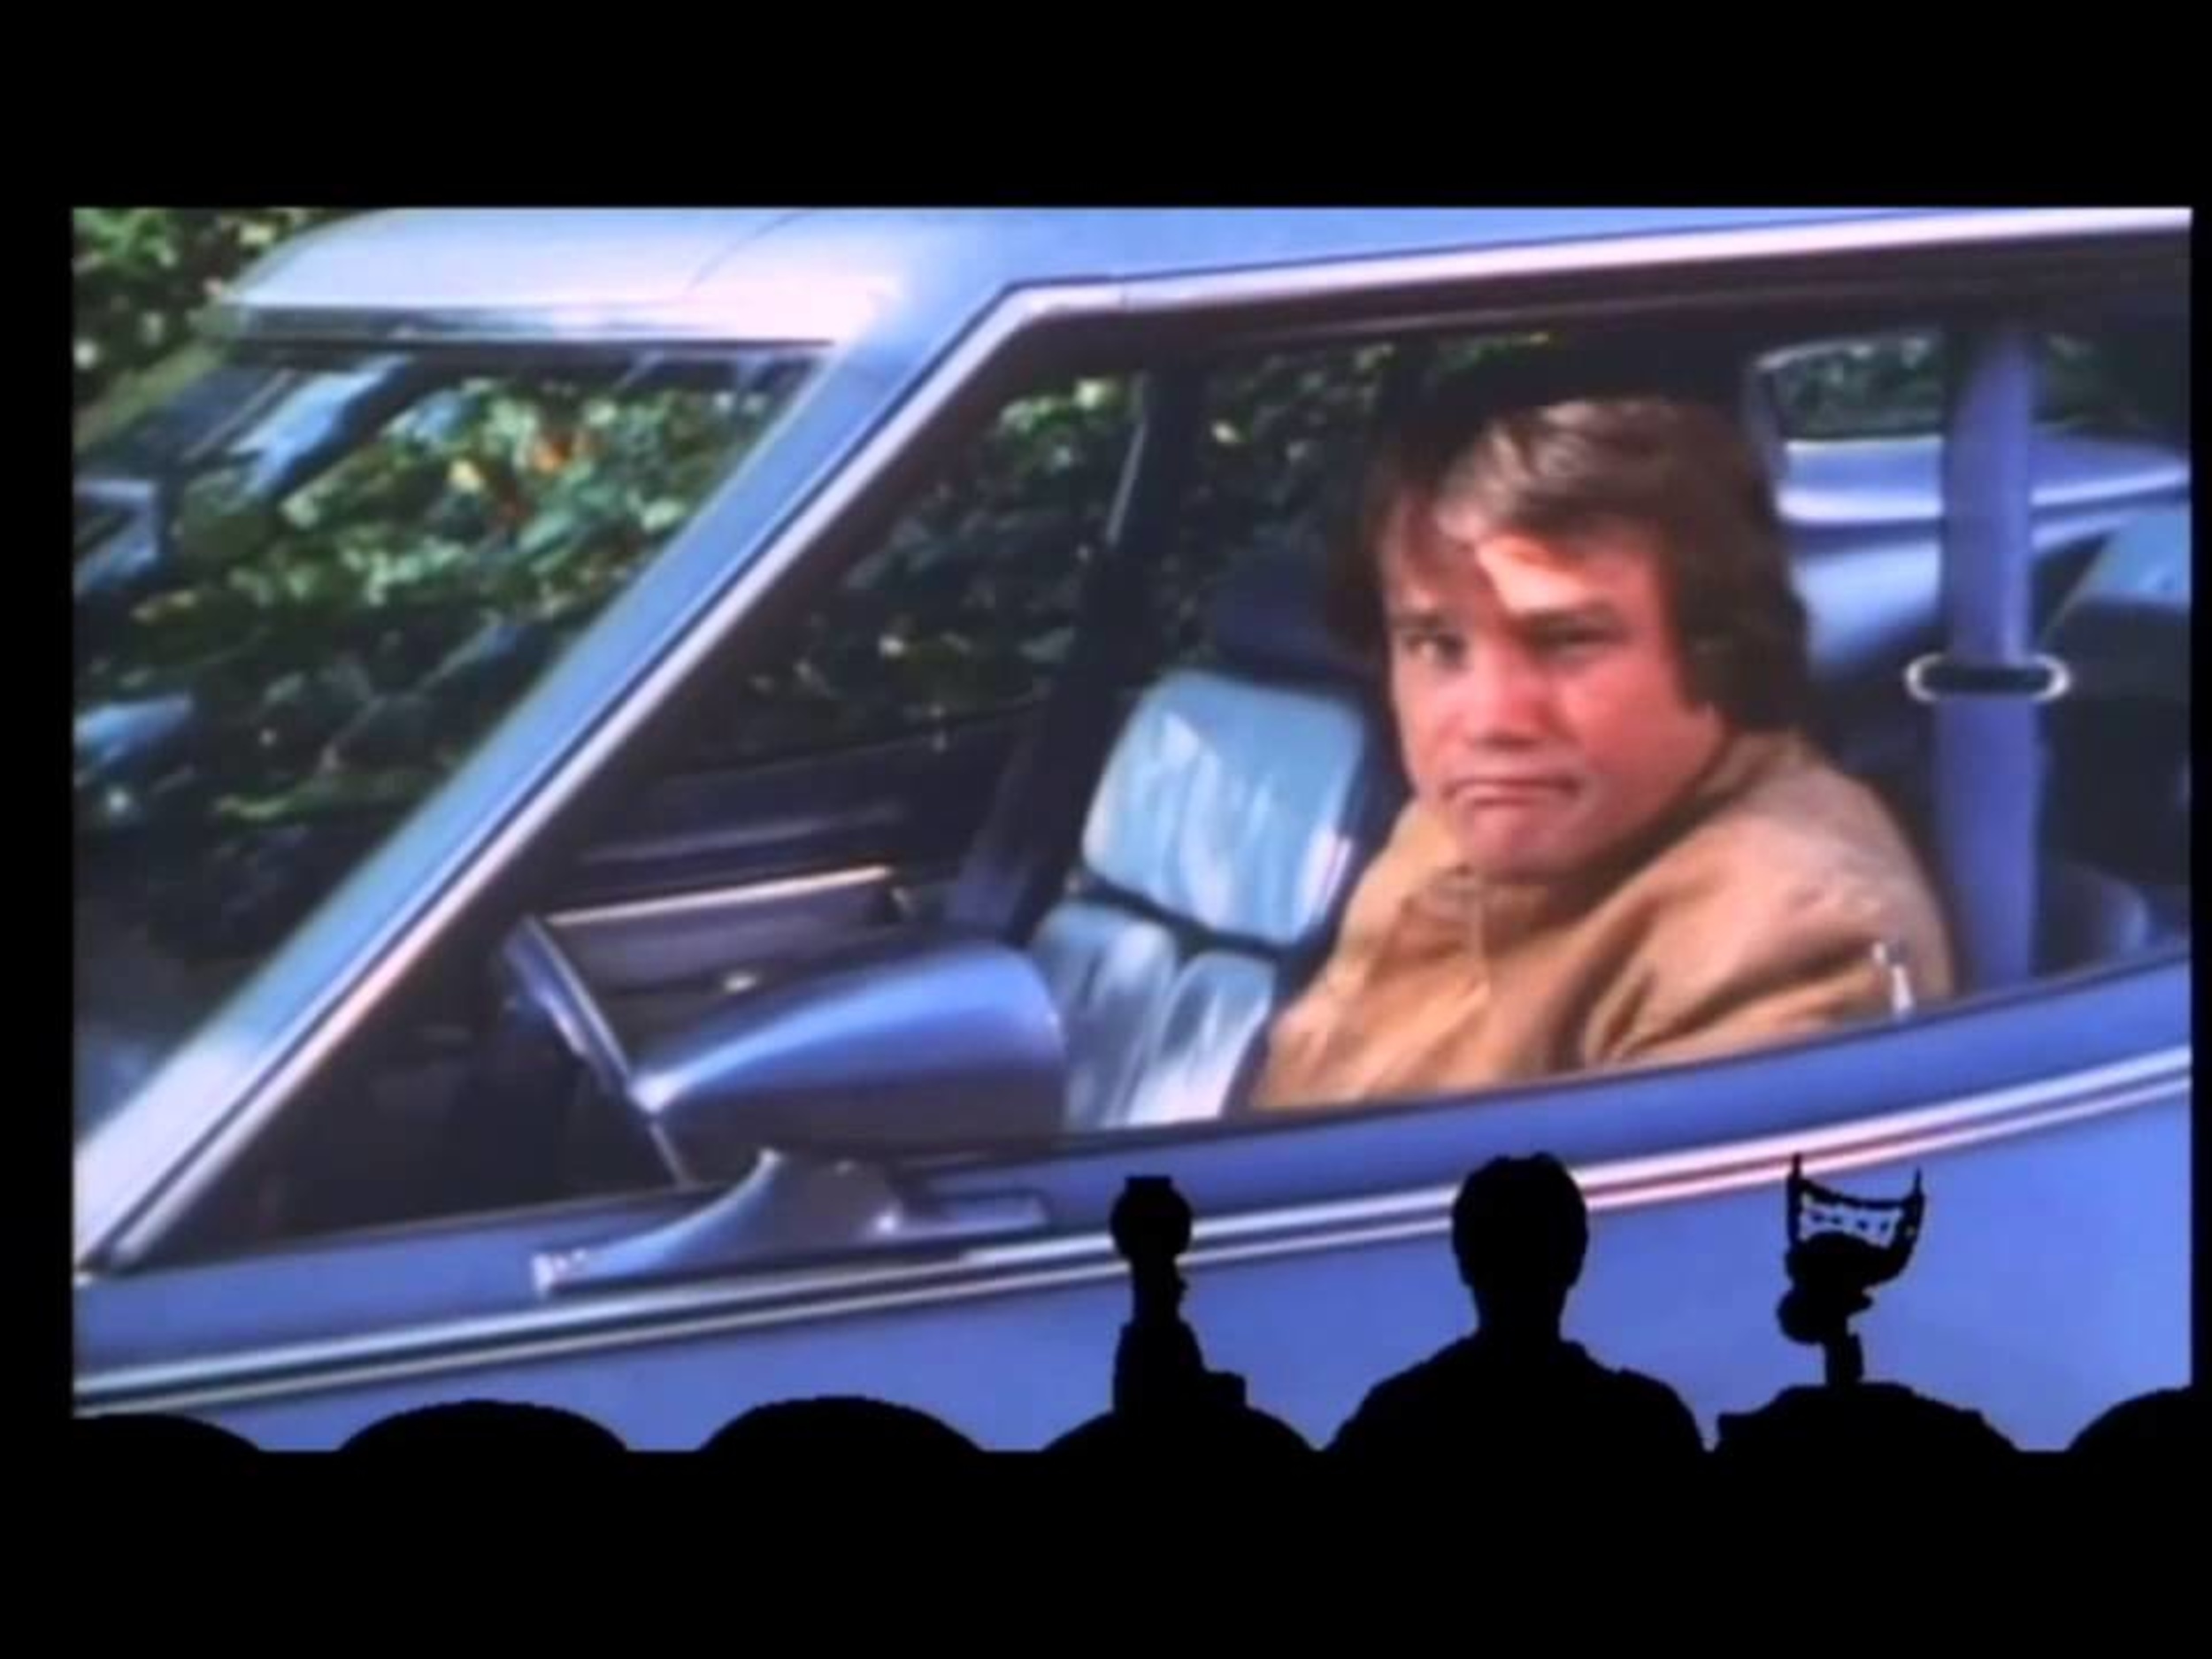 <p>Joe Don Baker isn’t a bad actor. However, he headlined a couple of lousy action films, making him an object of ridicule for the “MST3K” crew. “Final Justice” is pretty good, but “Mitchell” is the all-timer. It also happens to be the last Joel episode, which makes it momentous.</p><p>You may also like: <a href='https://www.yardbarker.com/entertainment/articles/20_screen_adaptations_that_did_the_book_justice_033124/s1__39471205'>20 screen adaptations that did the book justice</a></p>